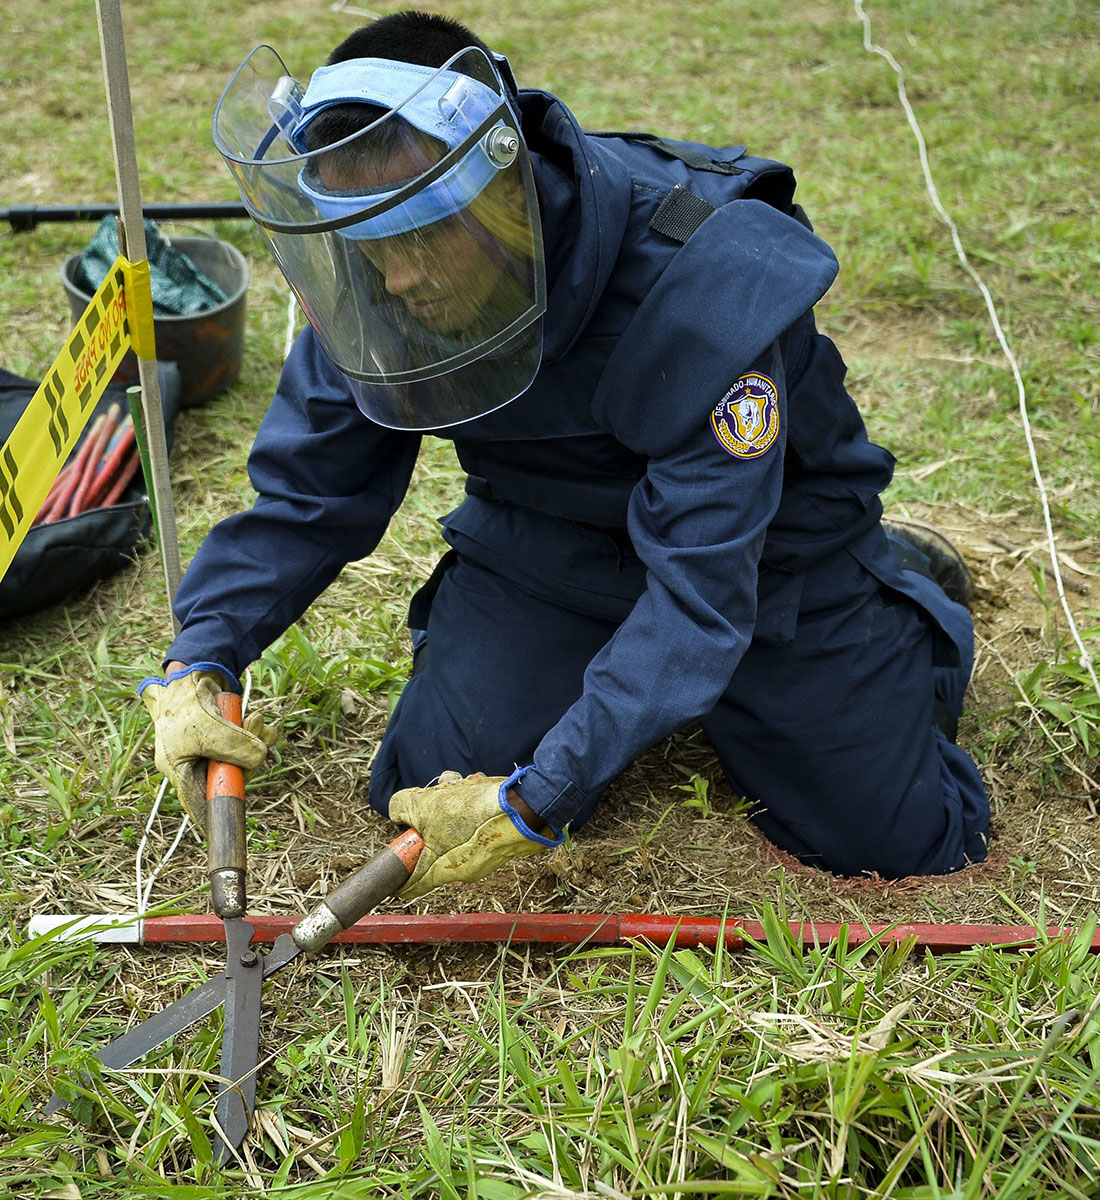 A soldier practices with a fake mine before engaging in humanitarian demining efforts, in Campo Alegre in Colombia. Assisting impacted communities is a core humanitarian disarmament approach. (Photo: RAUL ARBOLEDA/AFP via Getty Images).